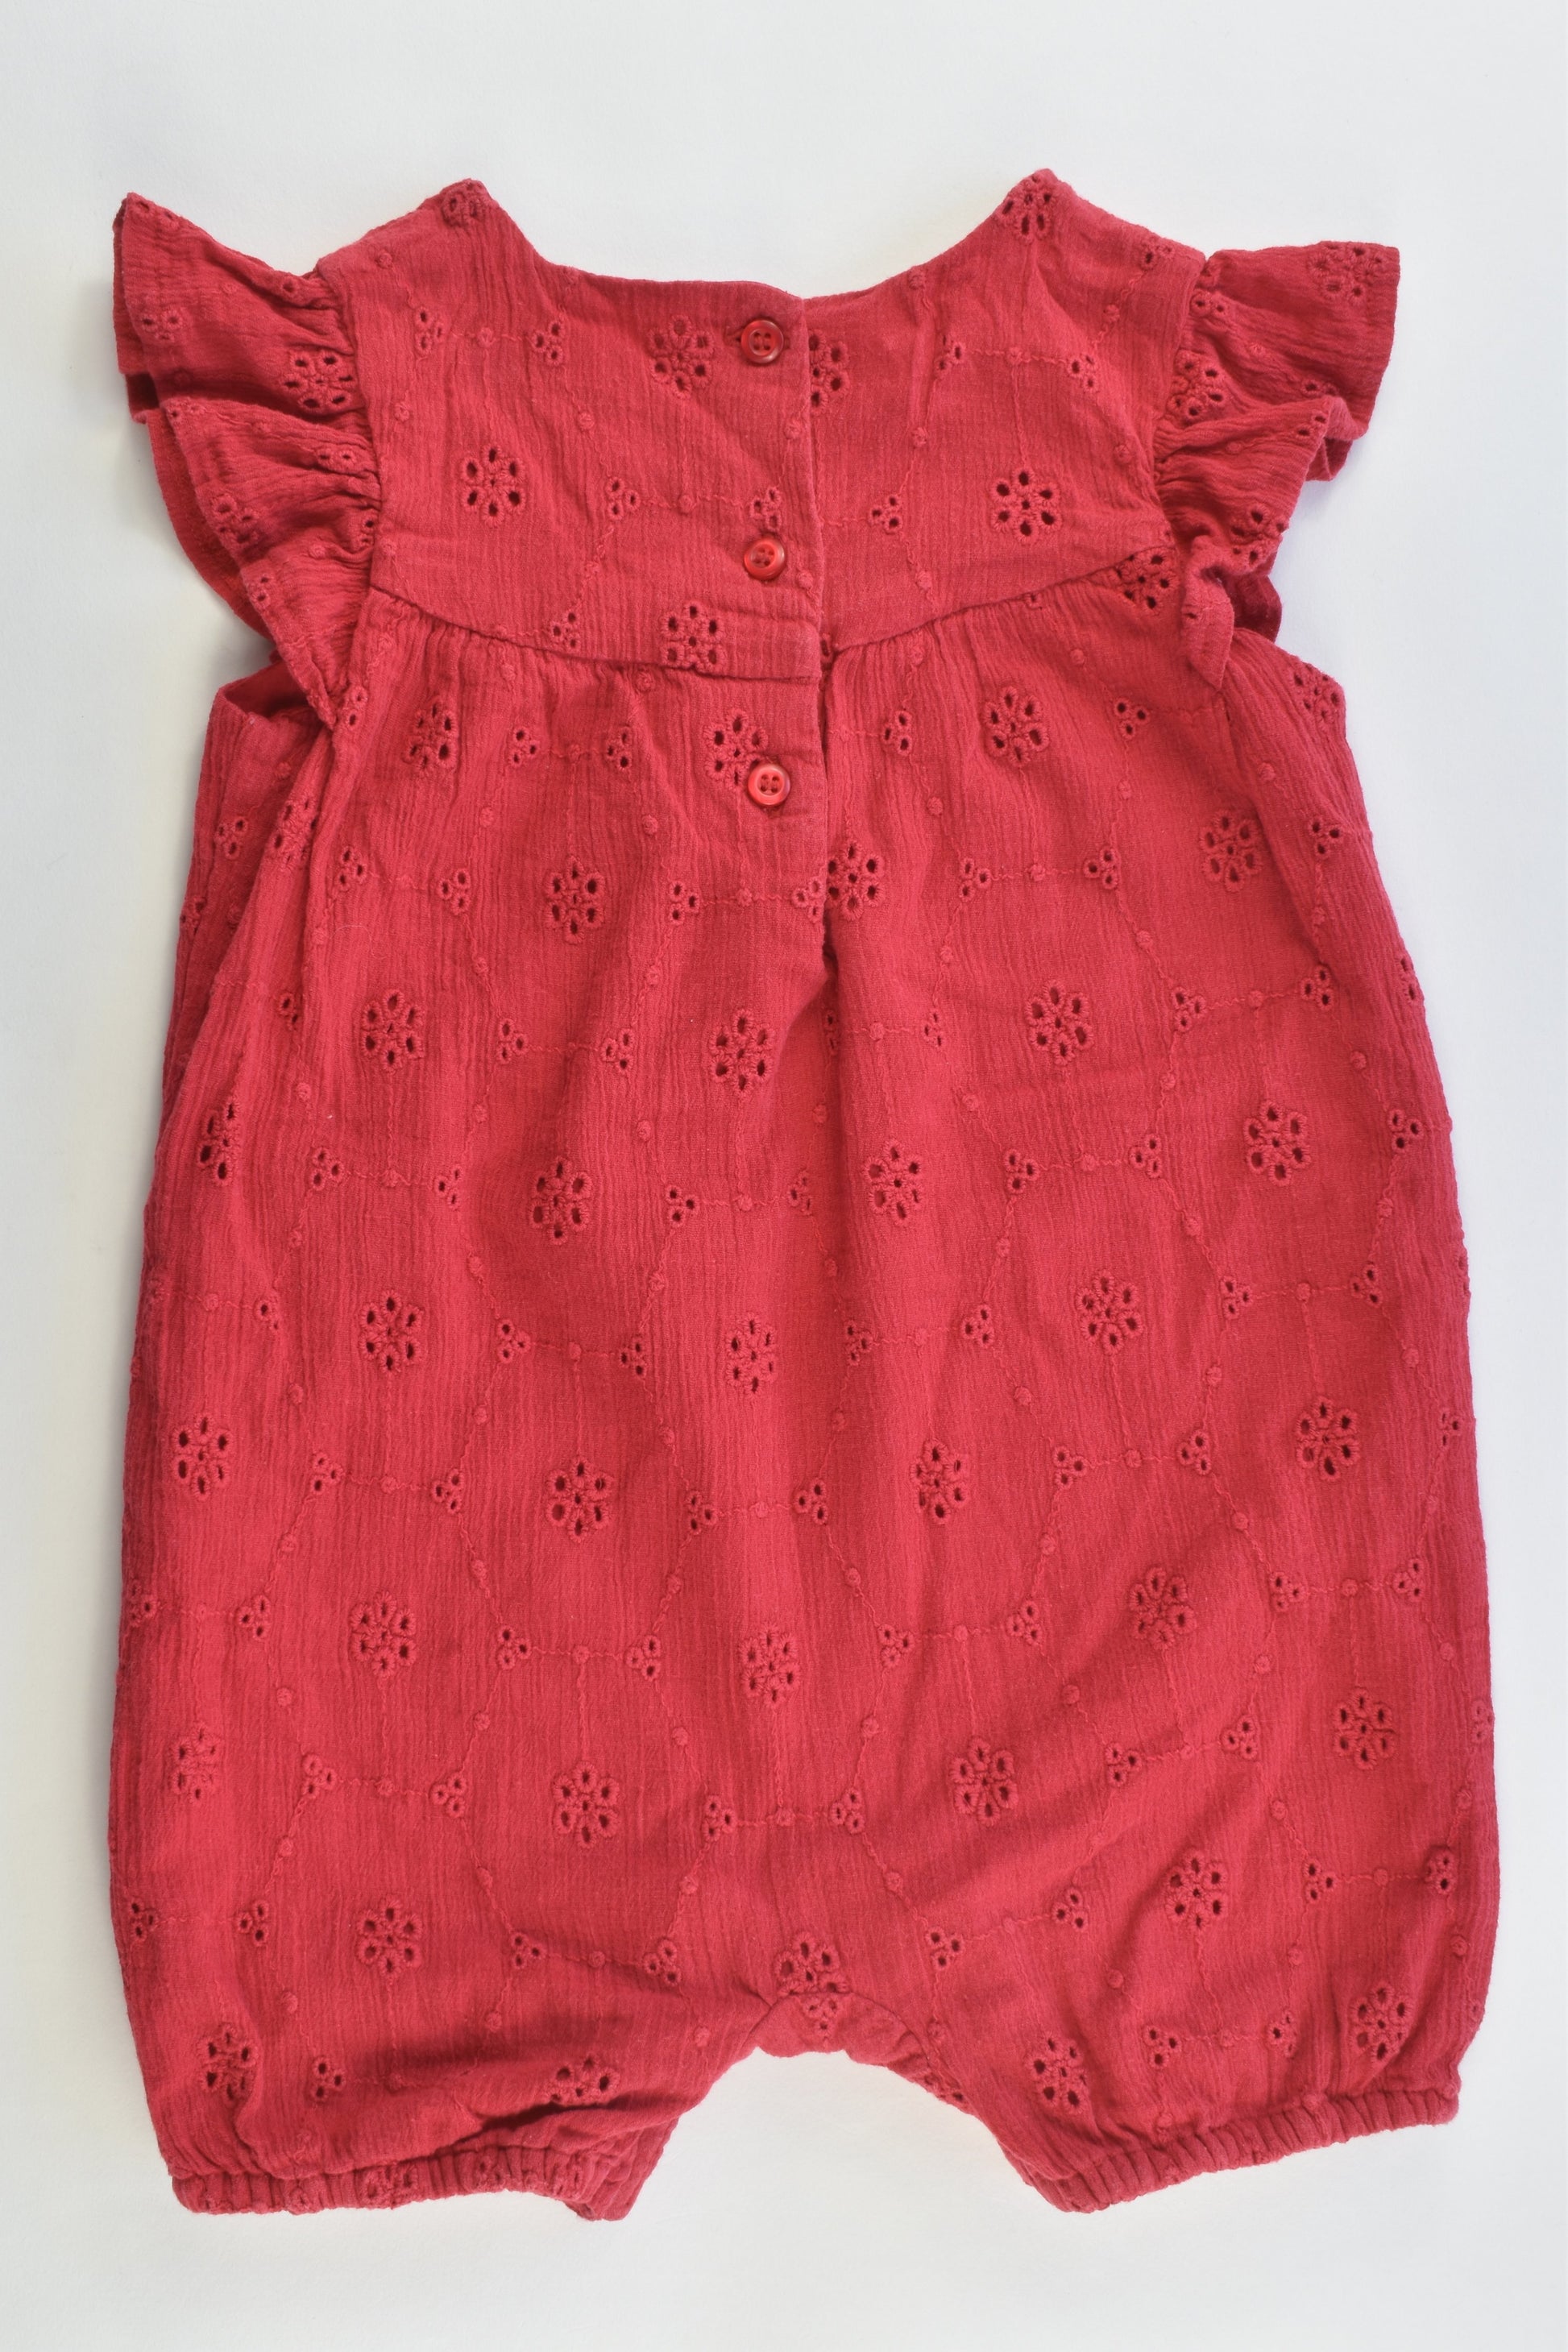 Matalan Size 12-18 months Lined Lace Playsuit